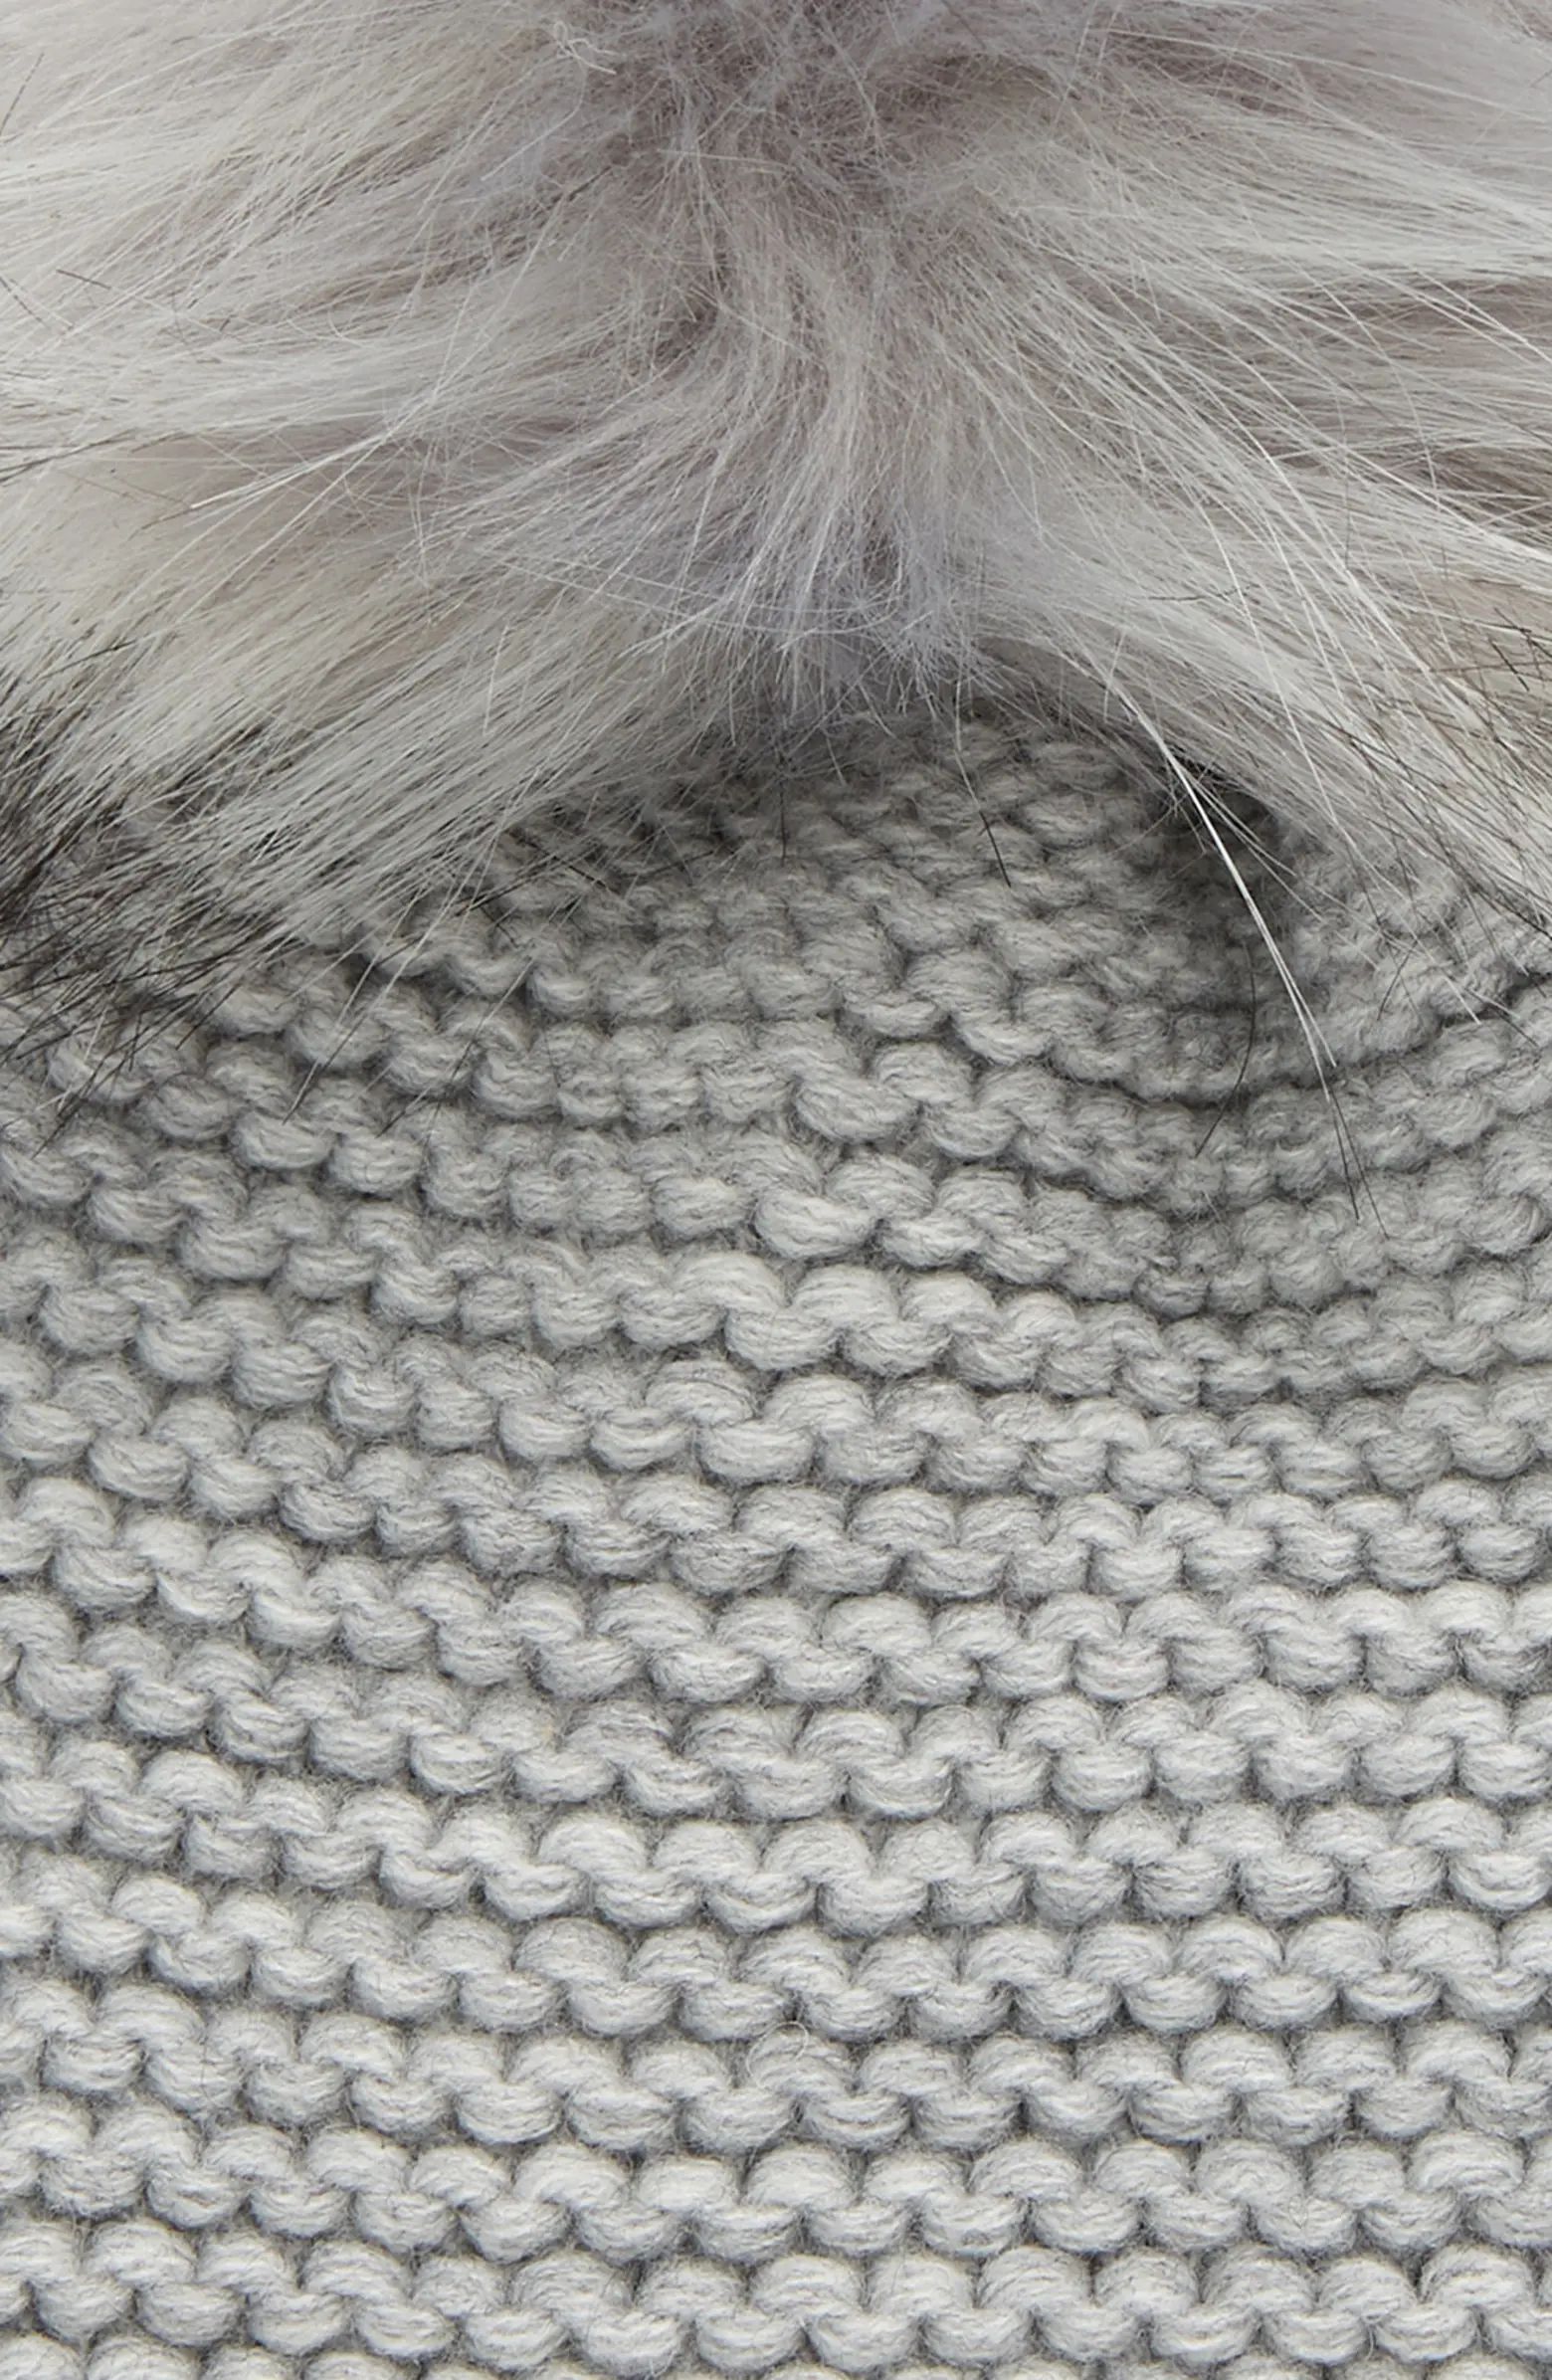 Wool Blend Beanie with Faux Fur Pom | Nordstrom